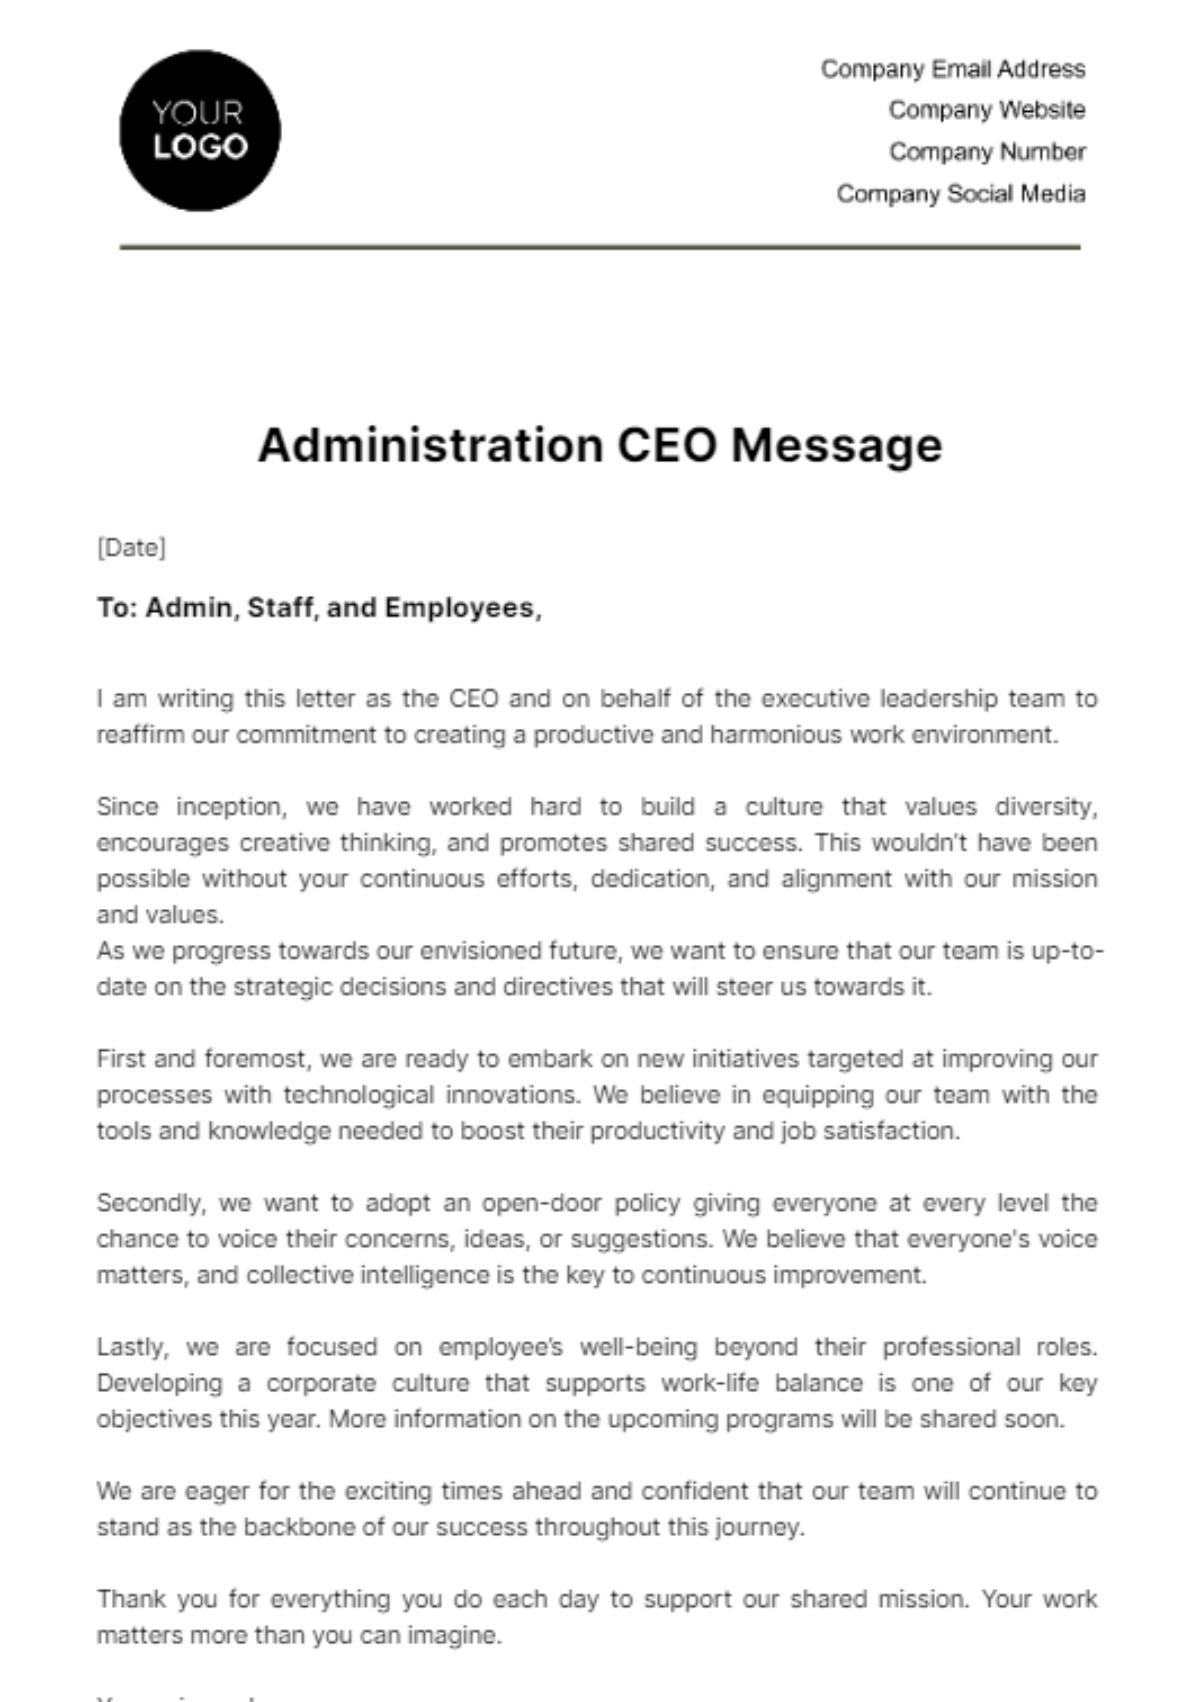 Administration CEO Message Template